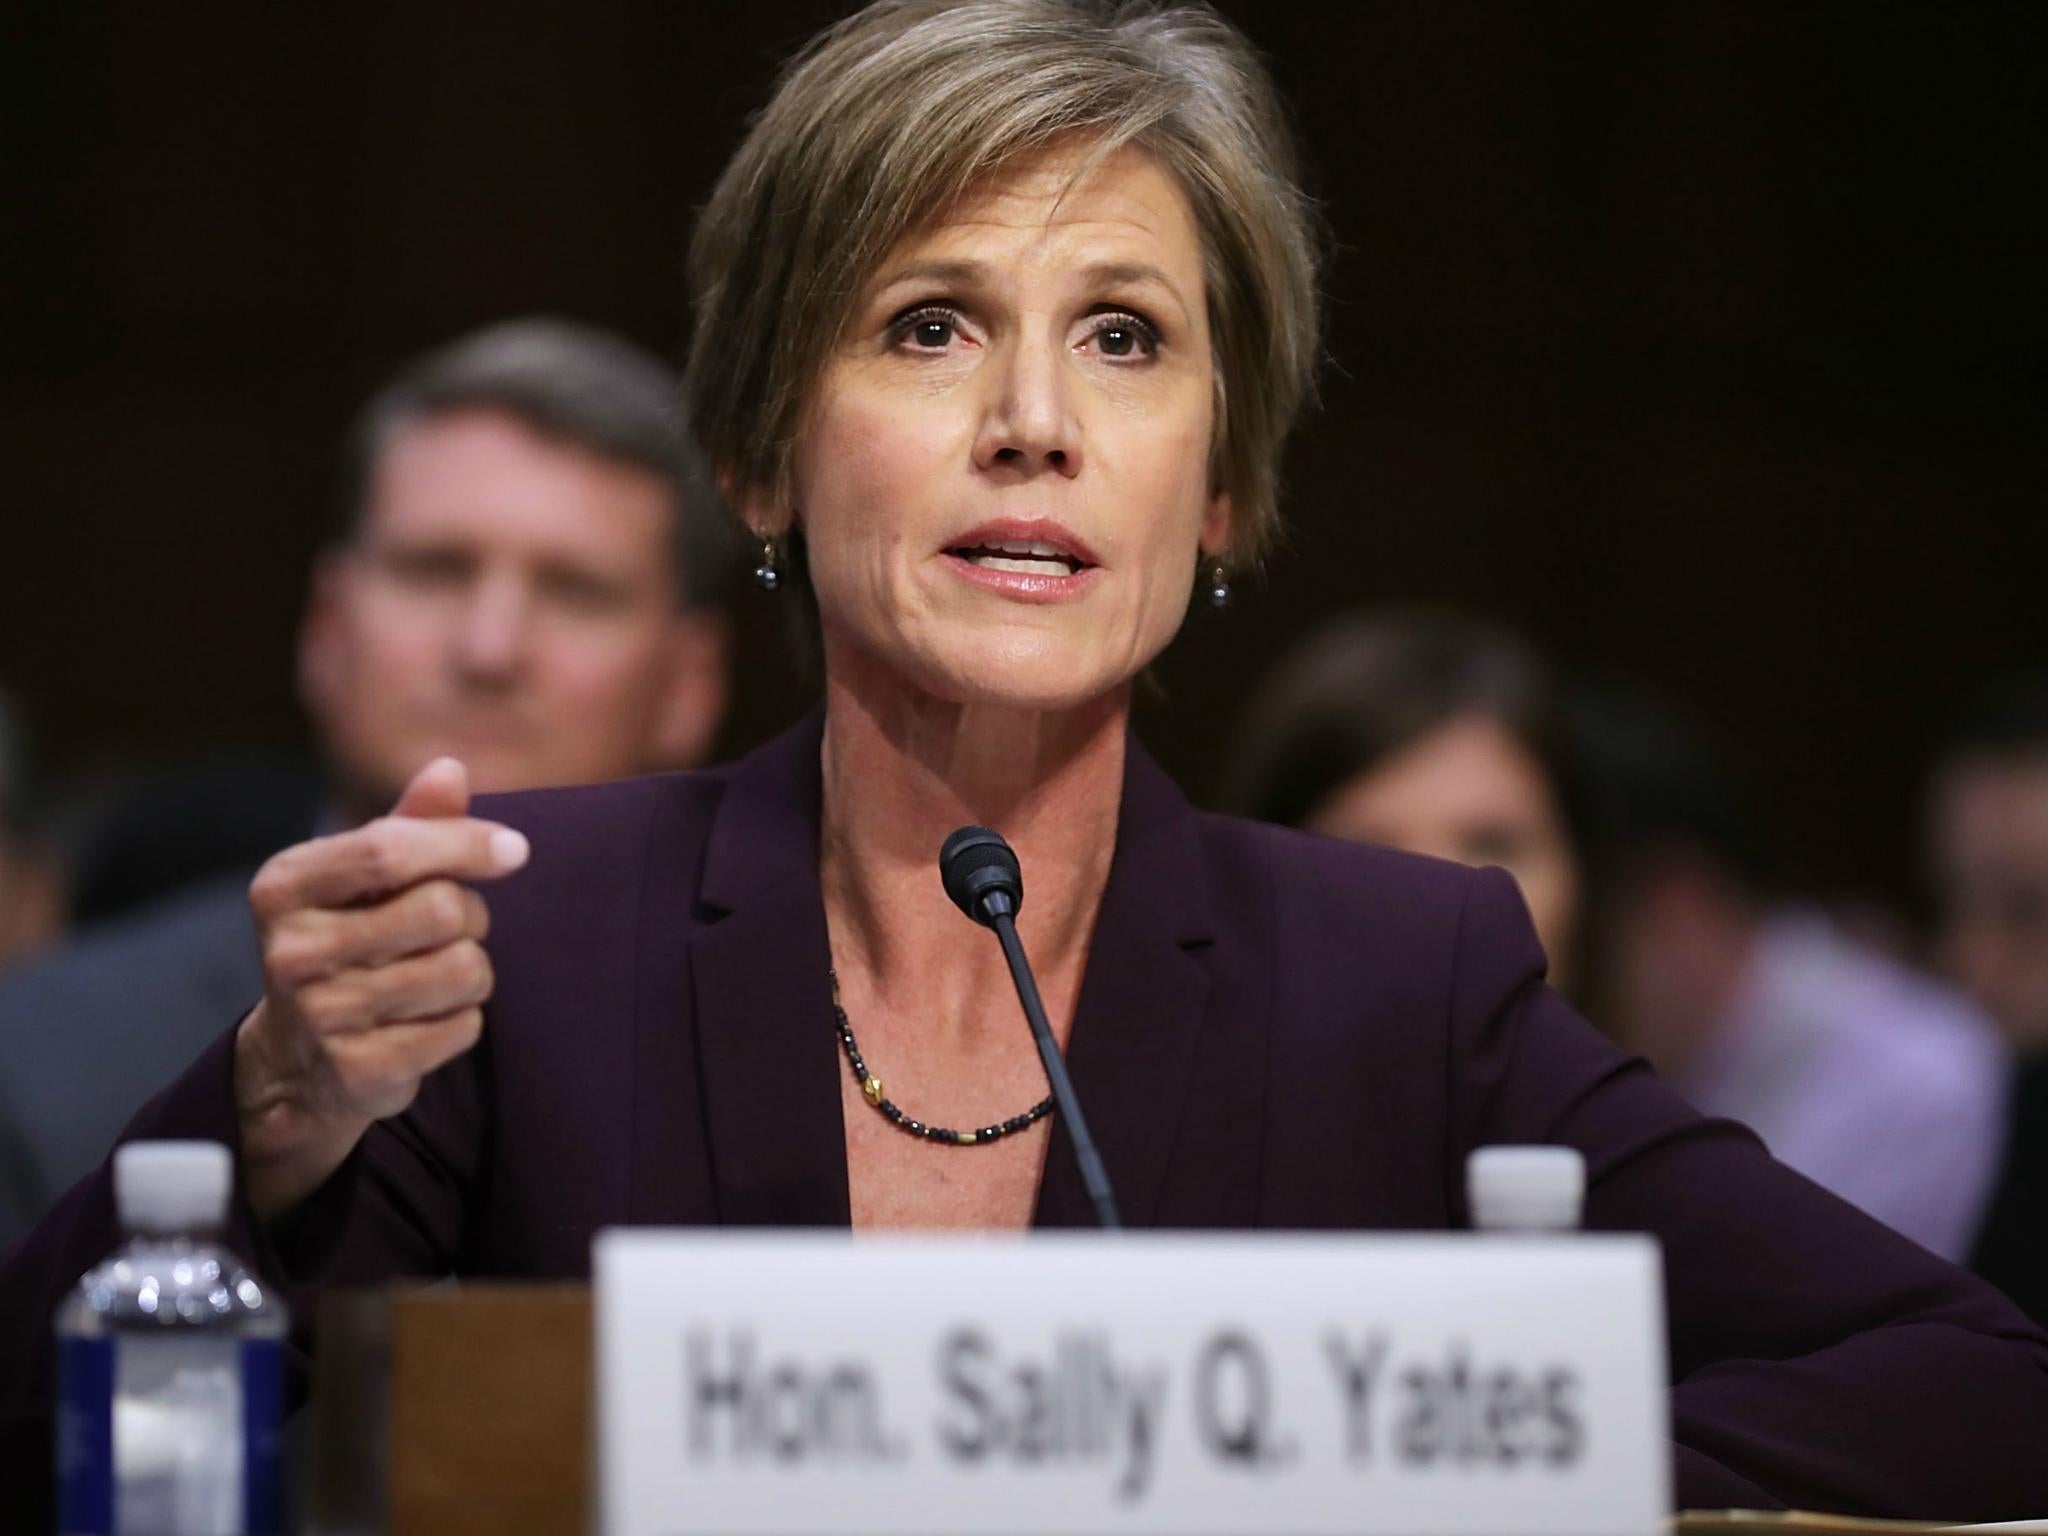 Former Deputy Attorney General Sally Yates warns that Russian hacking of a US election could take place again because of Donald Trump's refusal to believe the intelligence community